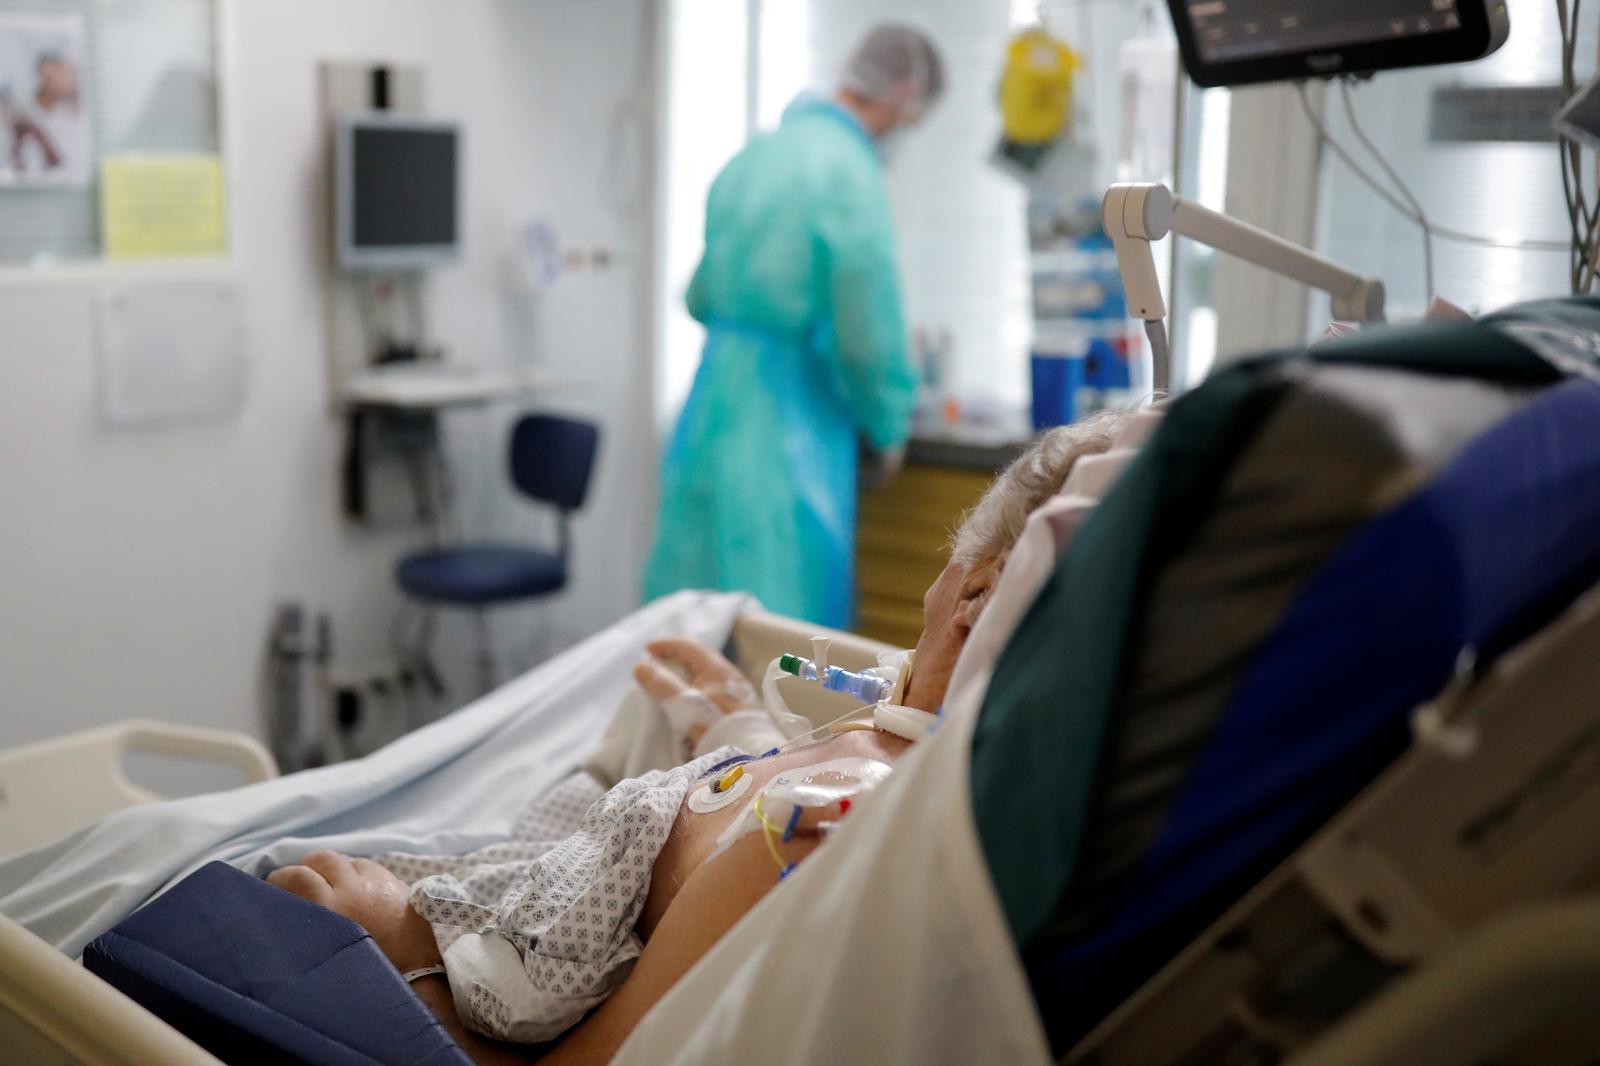 Hospitalizations rise as France's daily COVID-19 cases hit record